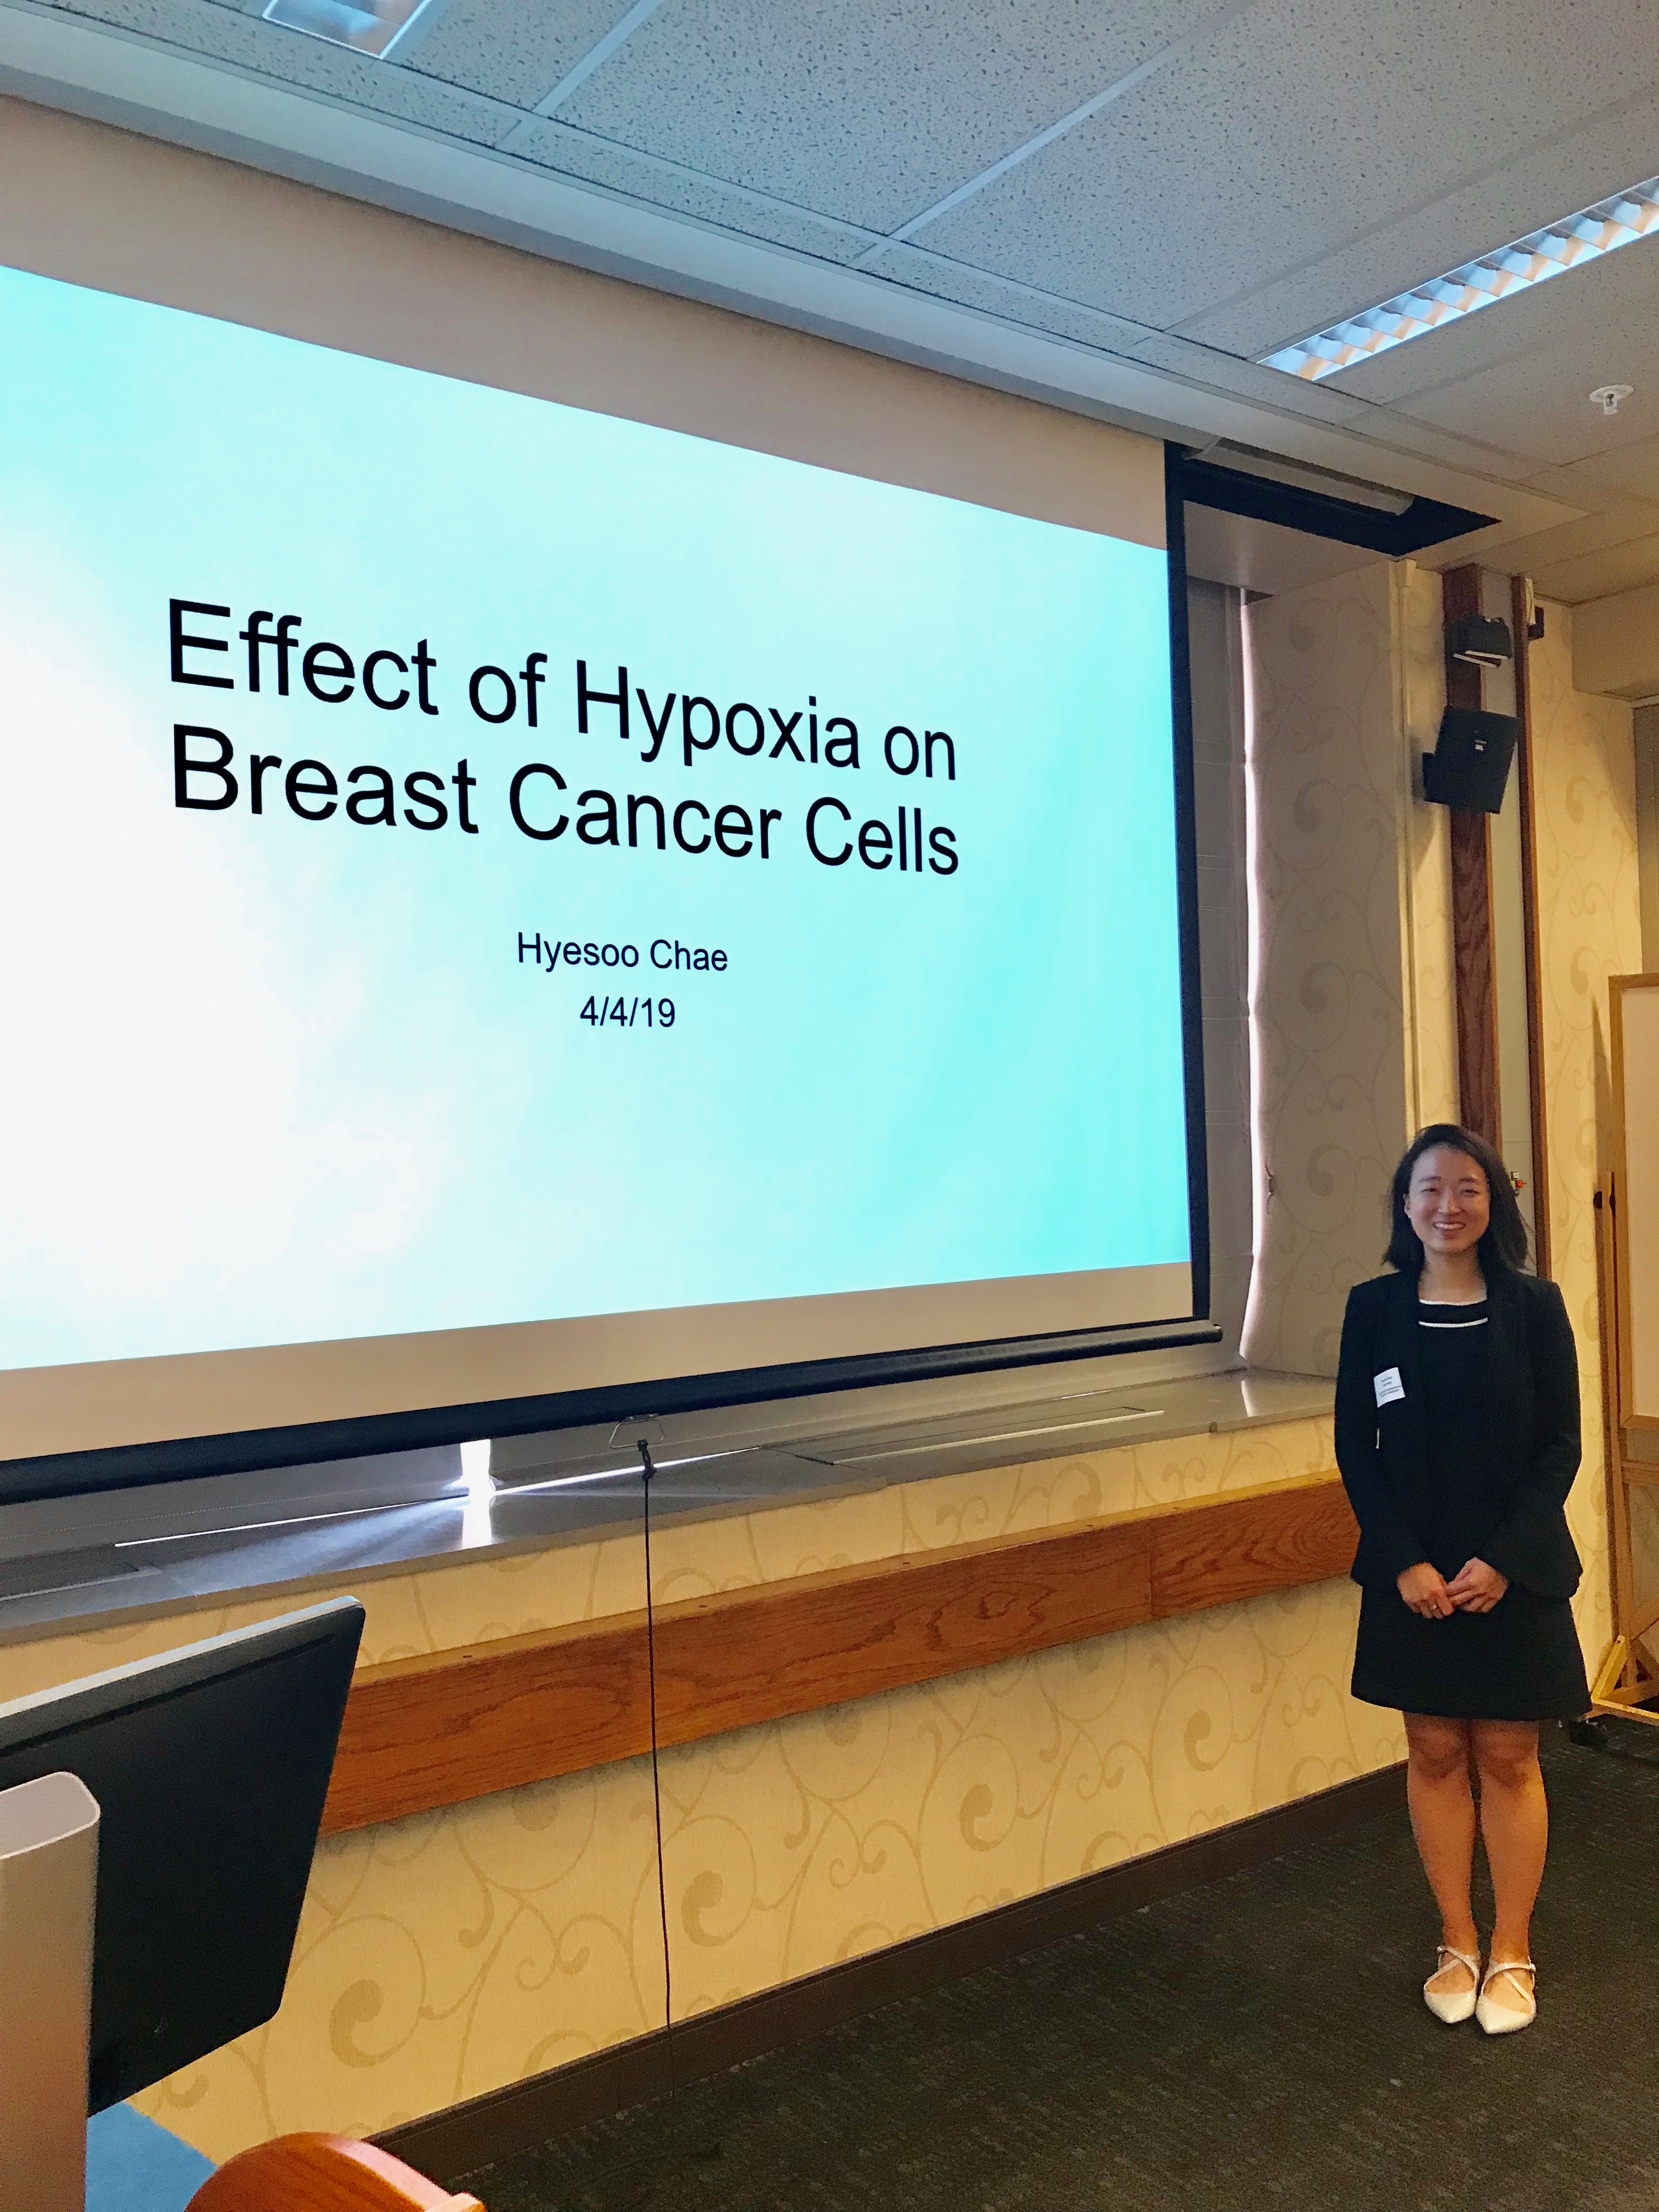 Hyesoo Chae - Effect of Hypoxia on Breast Cancer Cells